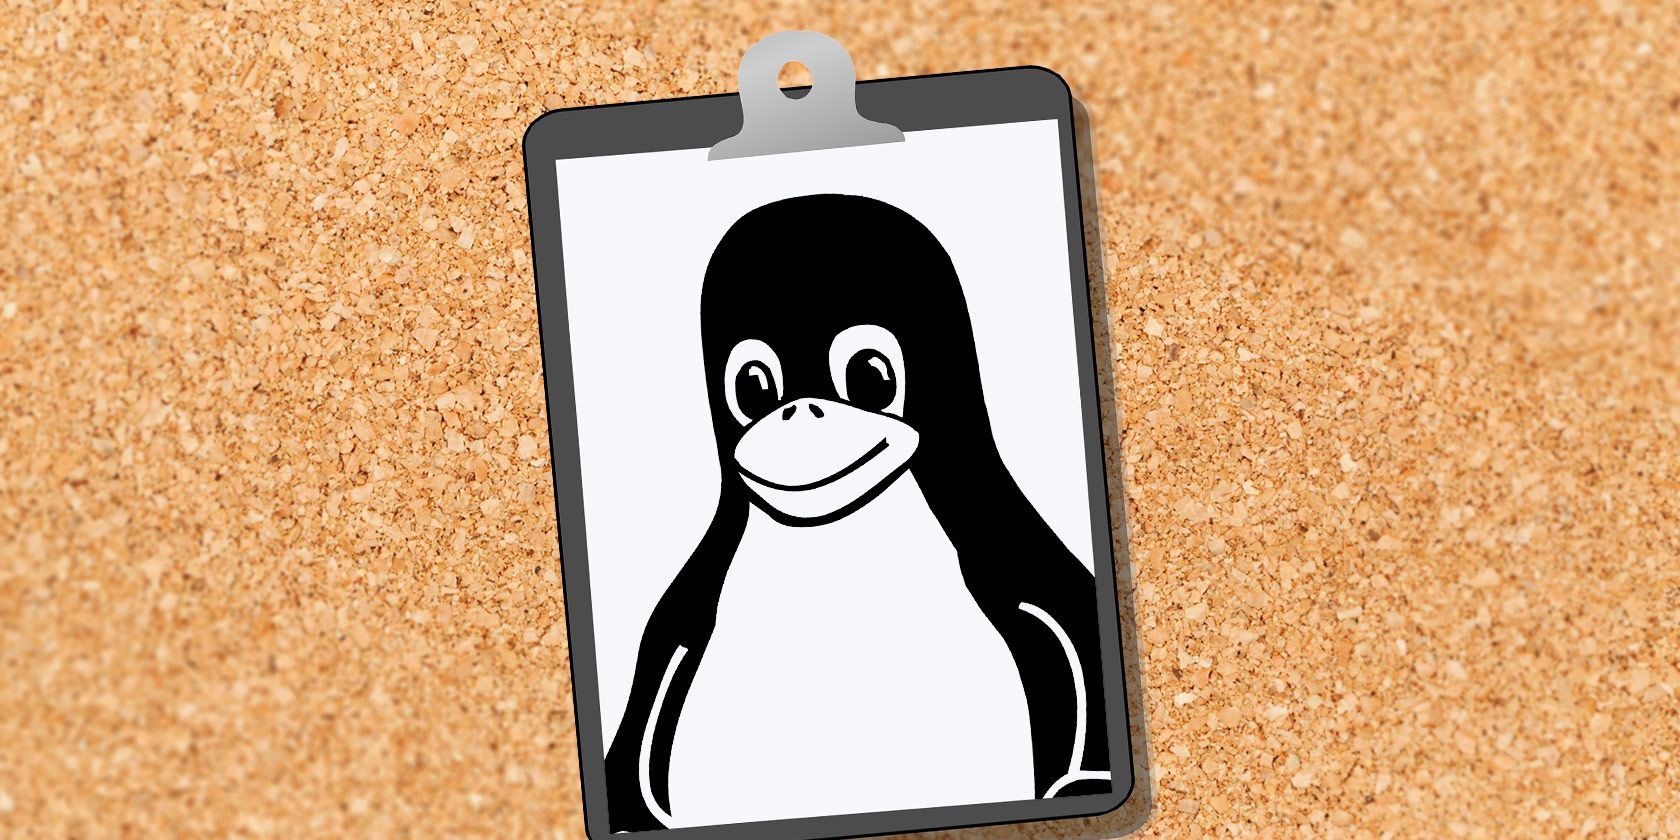 linux clipboard manager